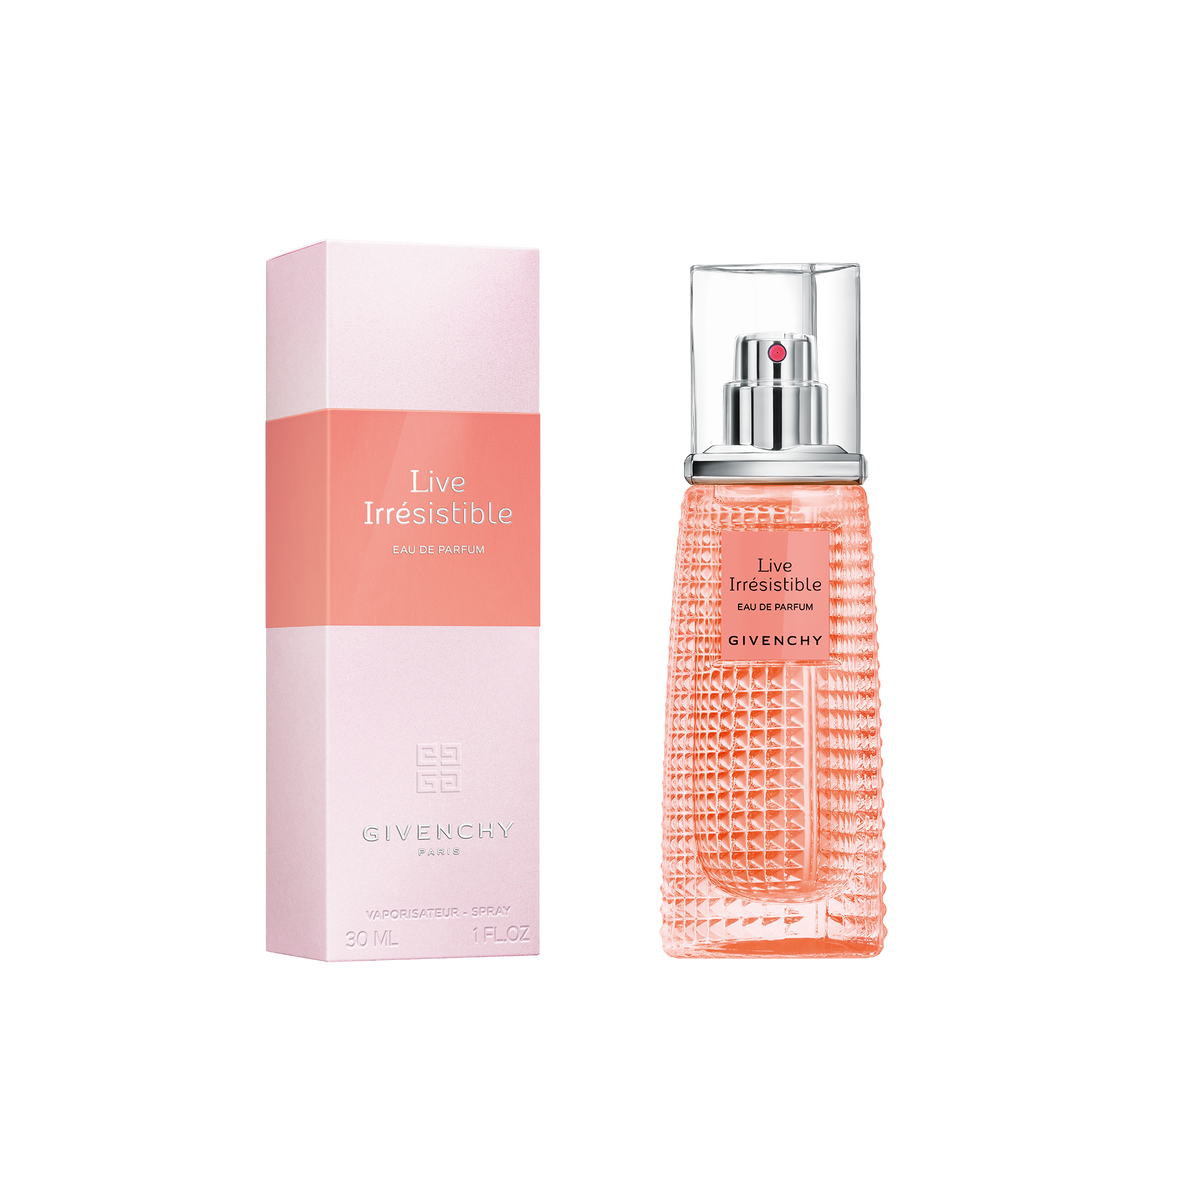 Givenchy irresistible toilette. Духи Givenchy Live irresistible Blossom Crush. Духи живанши Live irresistible Blossom. Givenchy Live irresistible EDP. Live irresistible EAI de Toilettr Givenchy.